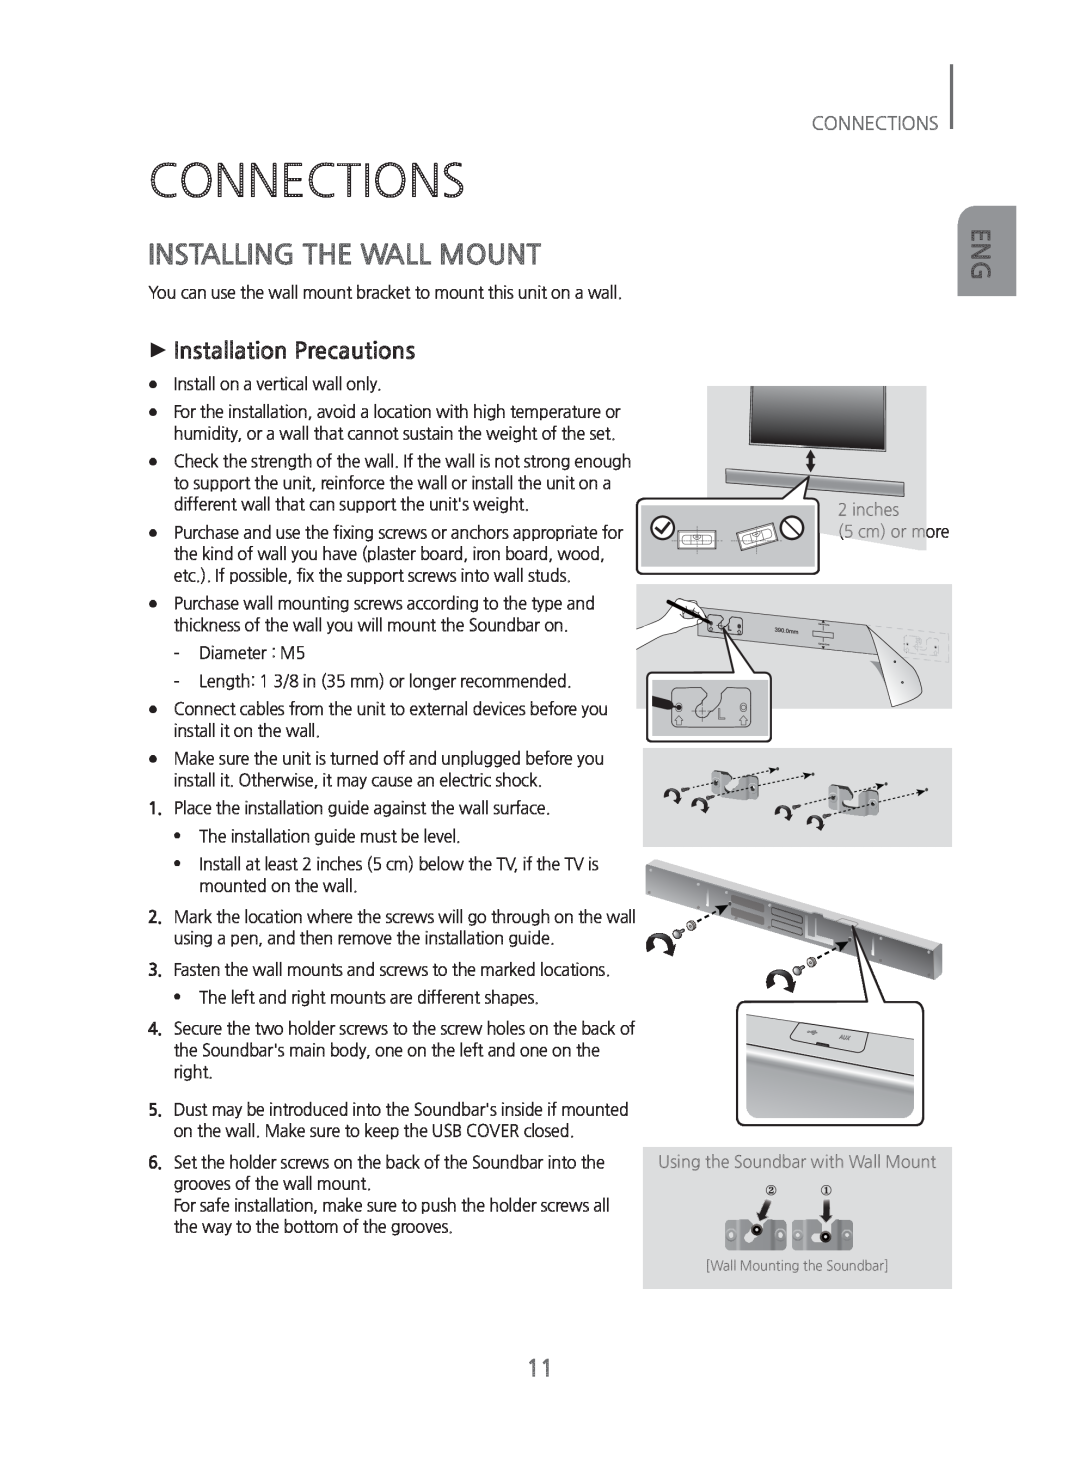 Samsung HW-H750/ZA manual Connections, Installing The Wall Mount 